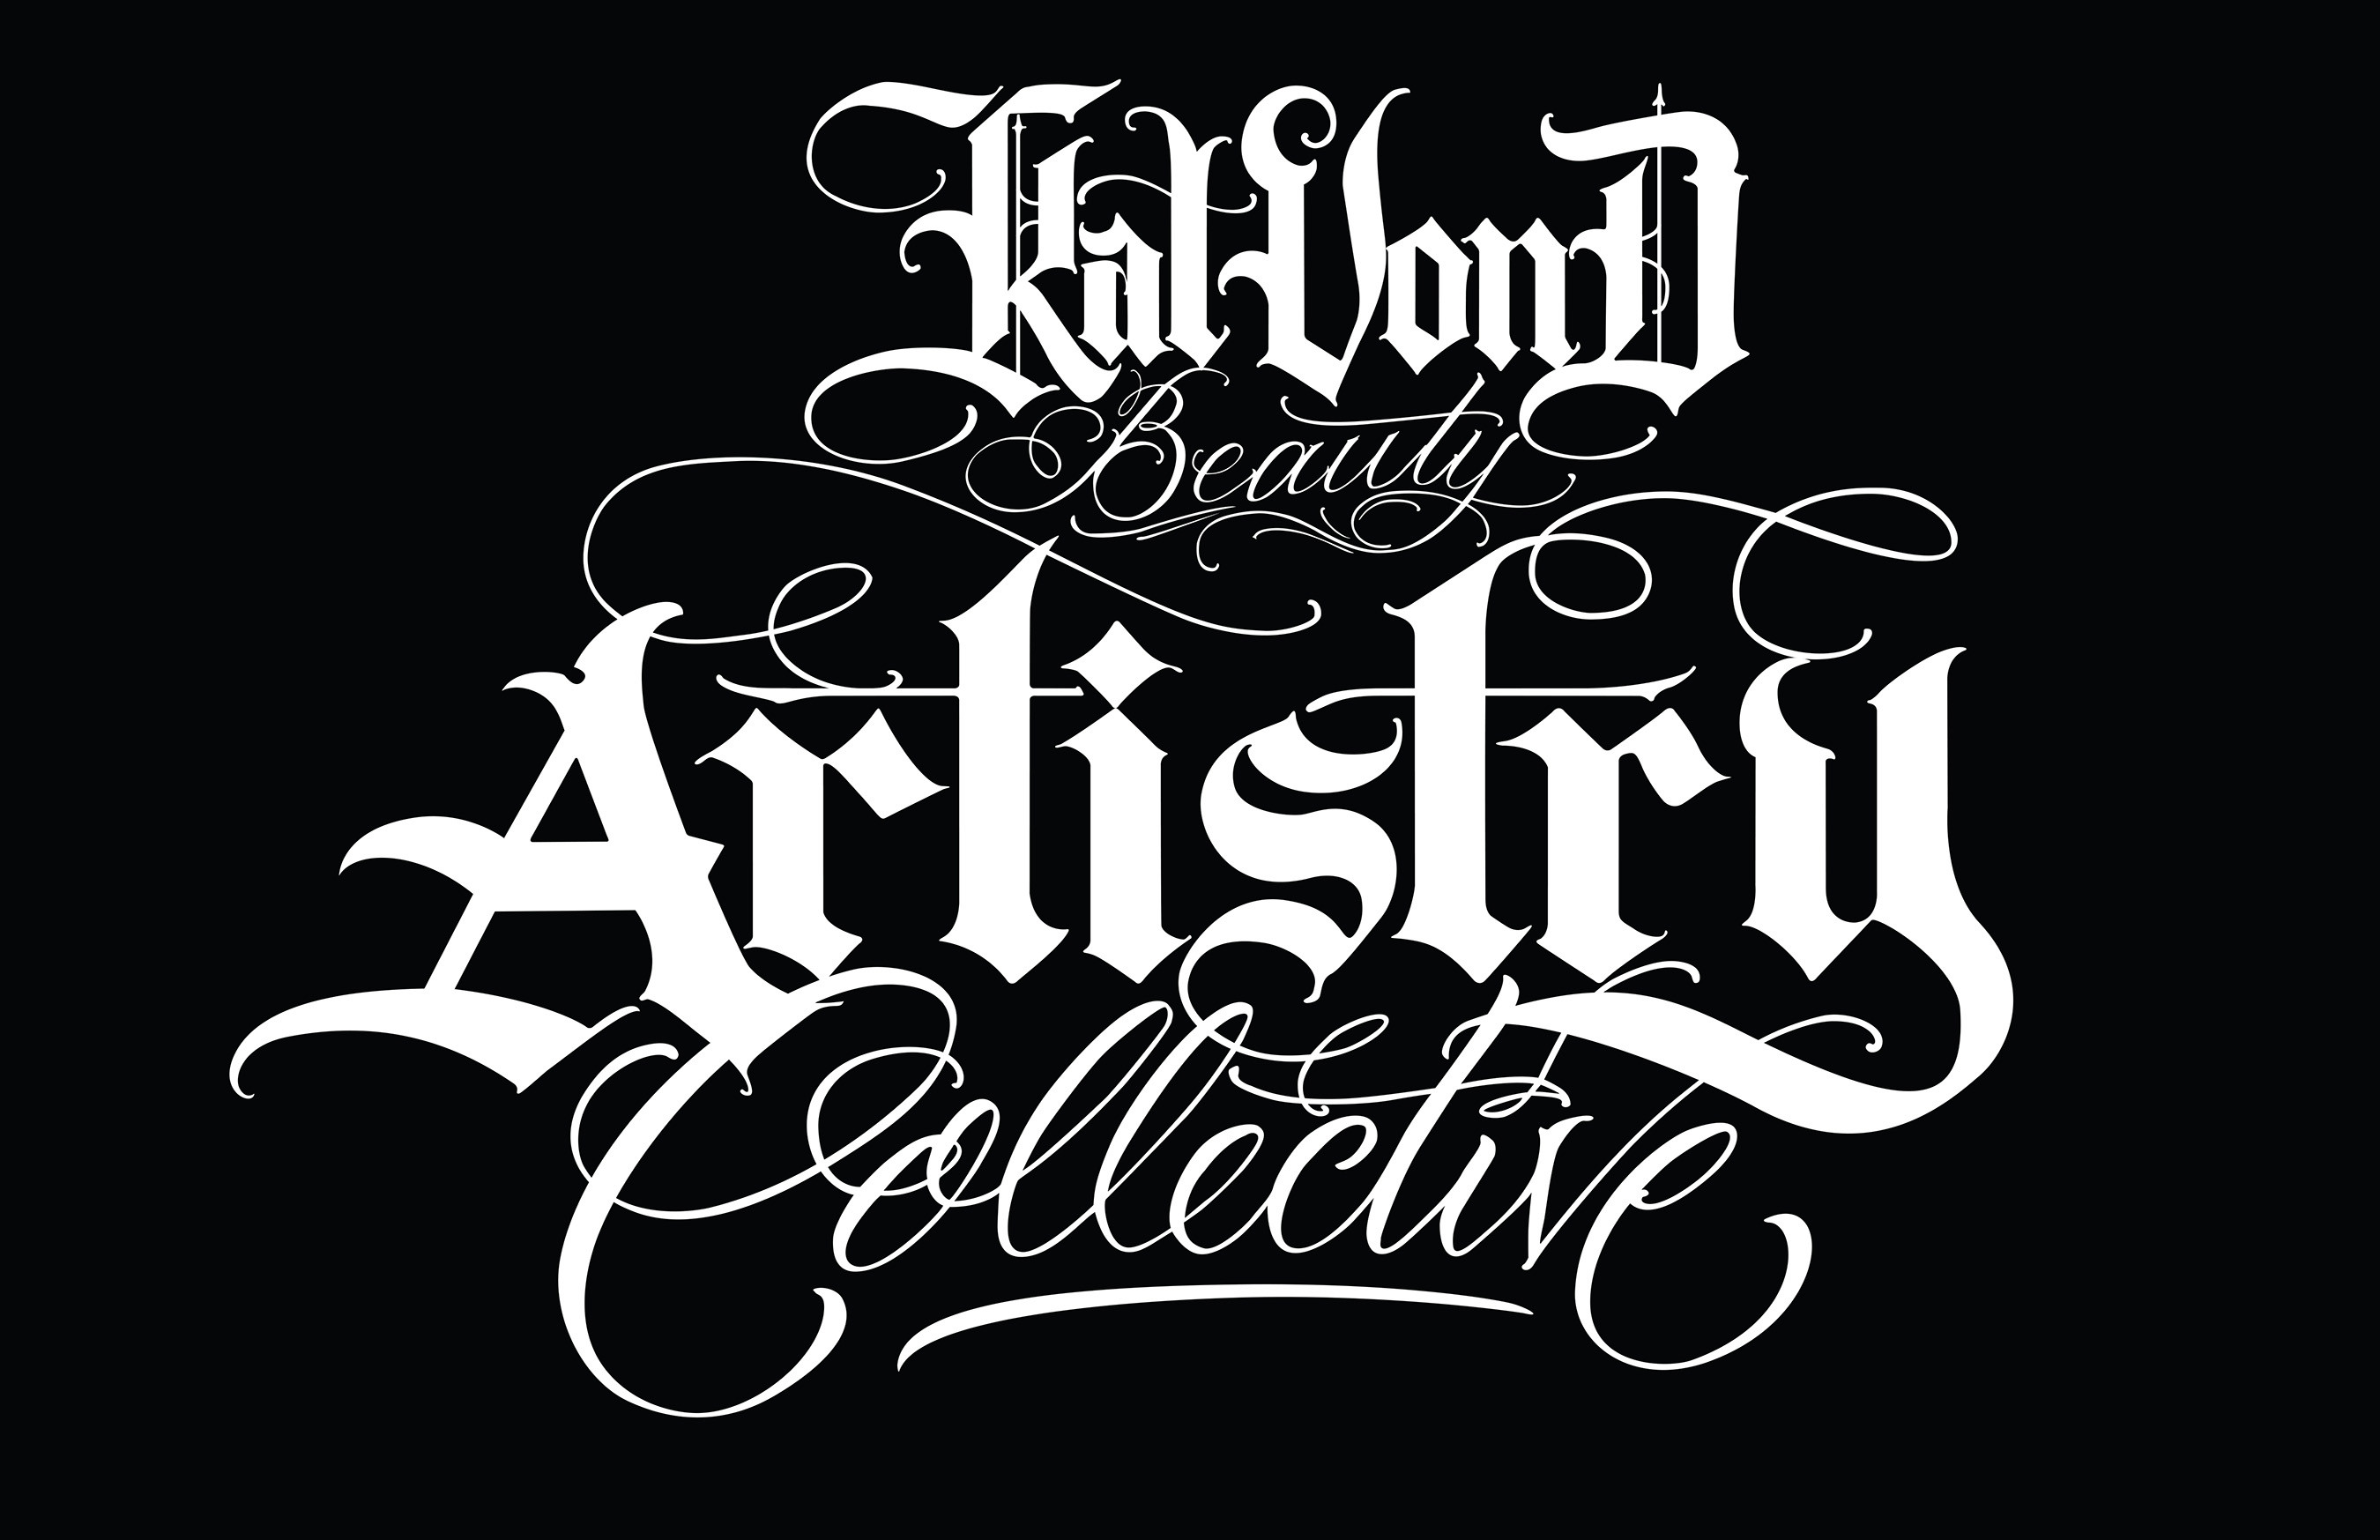 2700x1747 Artistry Collective Logo. Kat Von D Beauty Artistry Collective